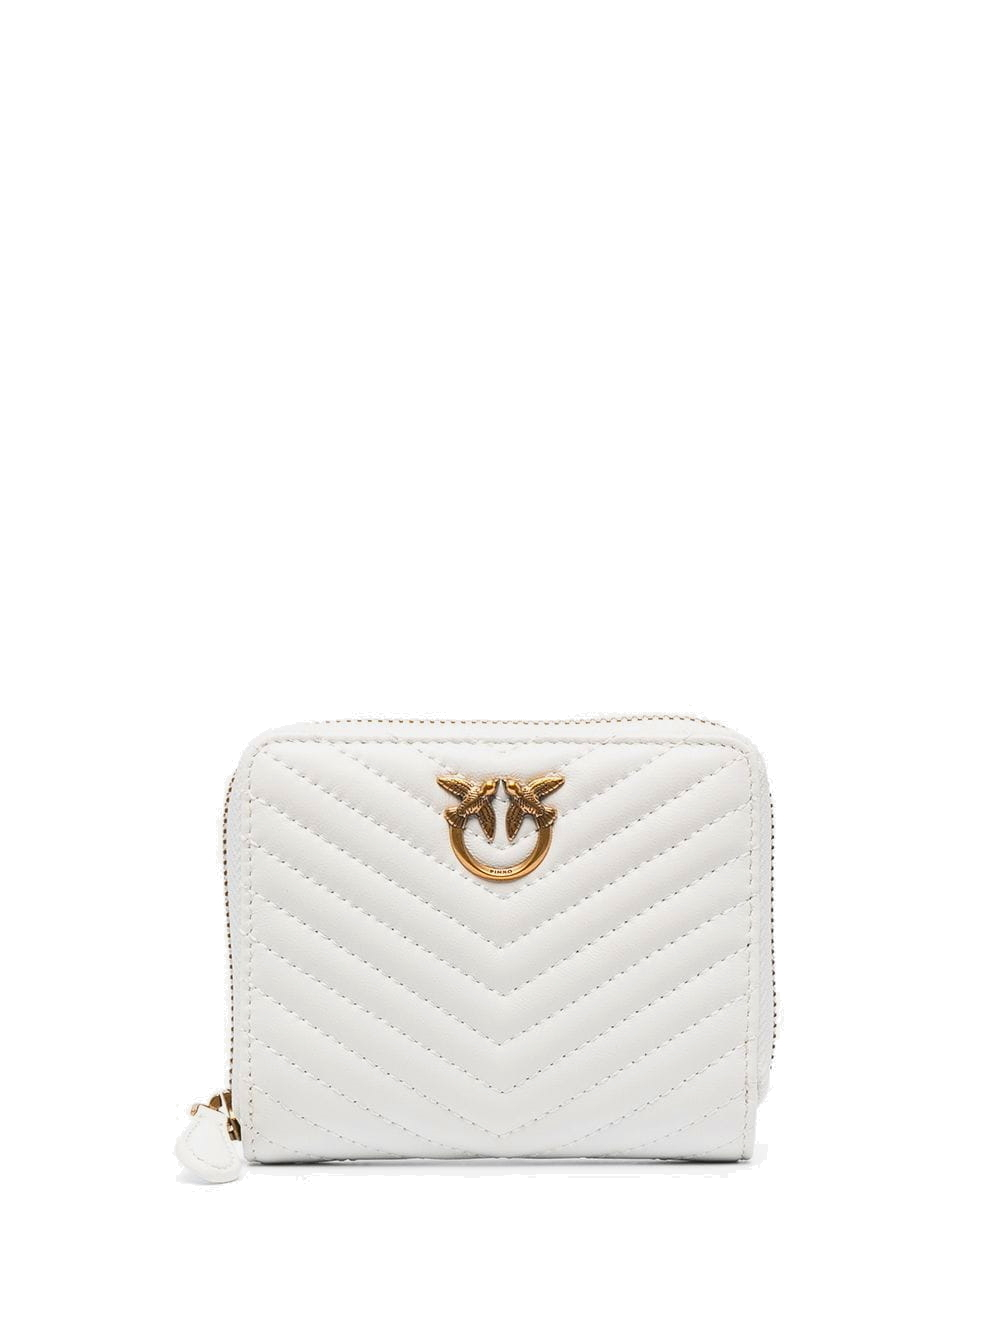 TAYLOR QUILTED WALLET - white